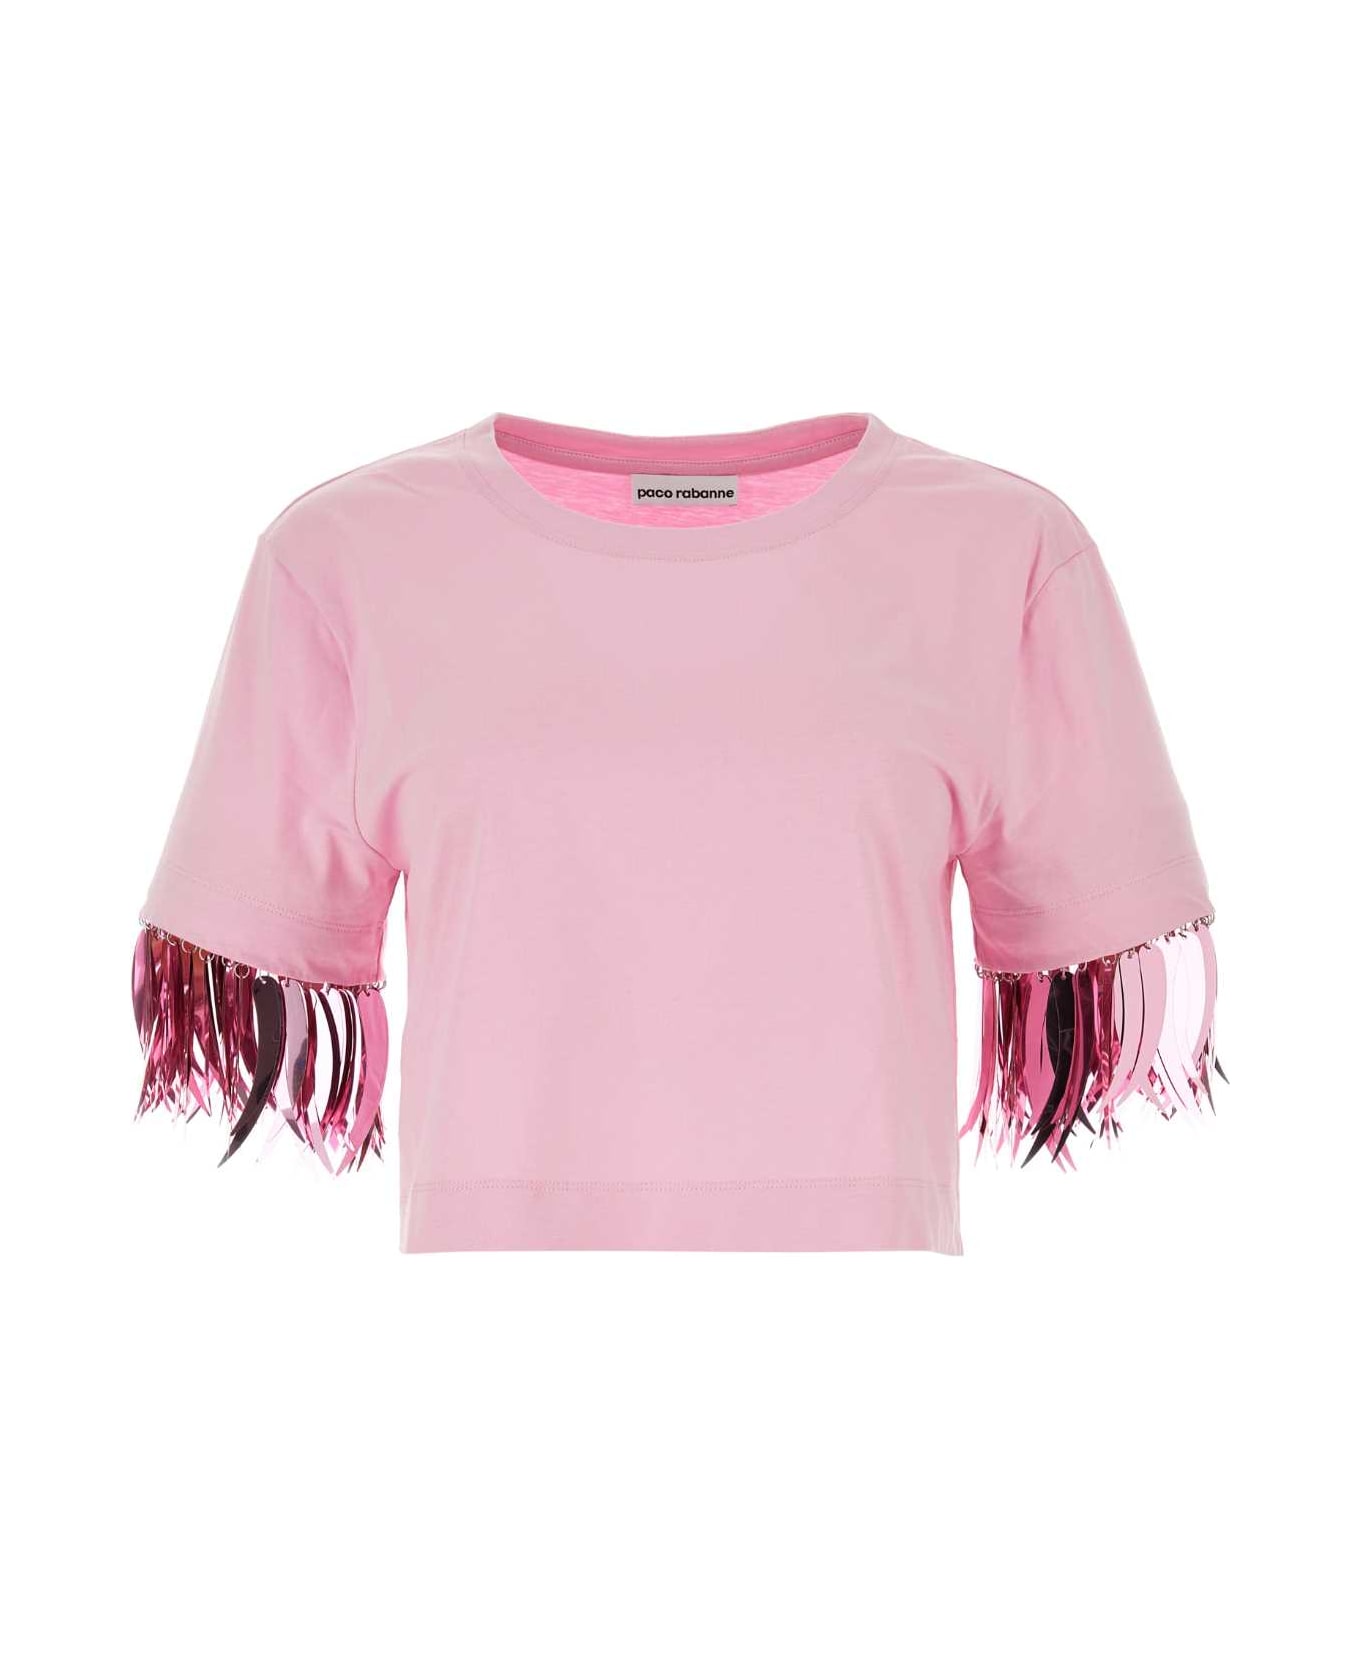 Paco Rabanne Pink Cotton T-shirt - PINK Tシャツ